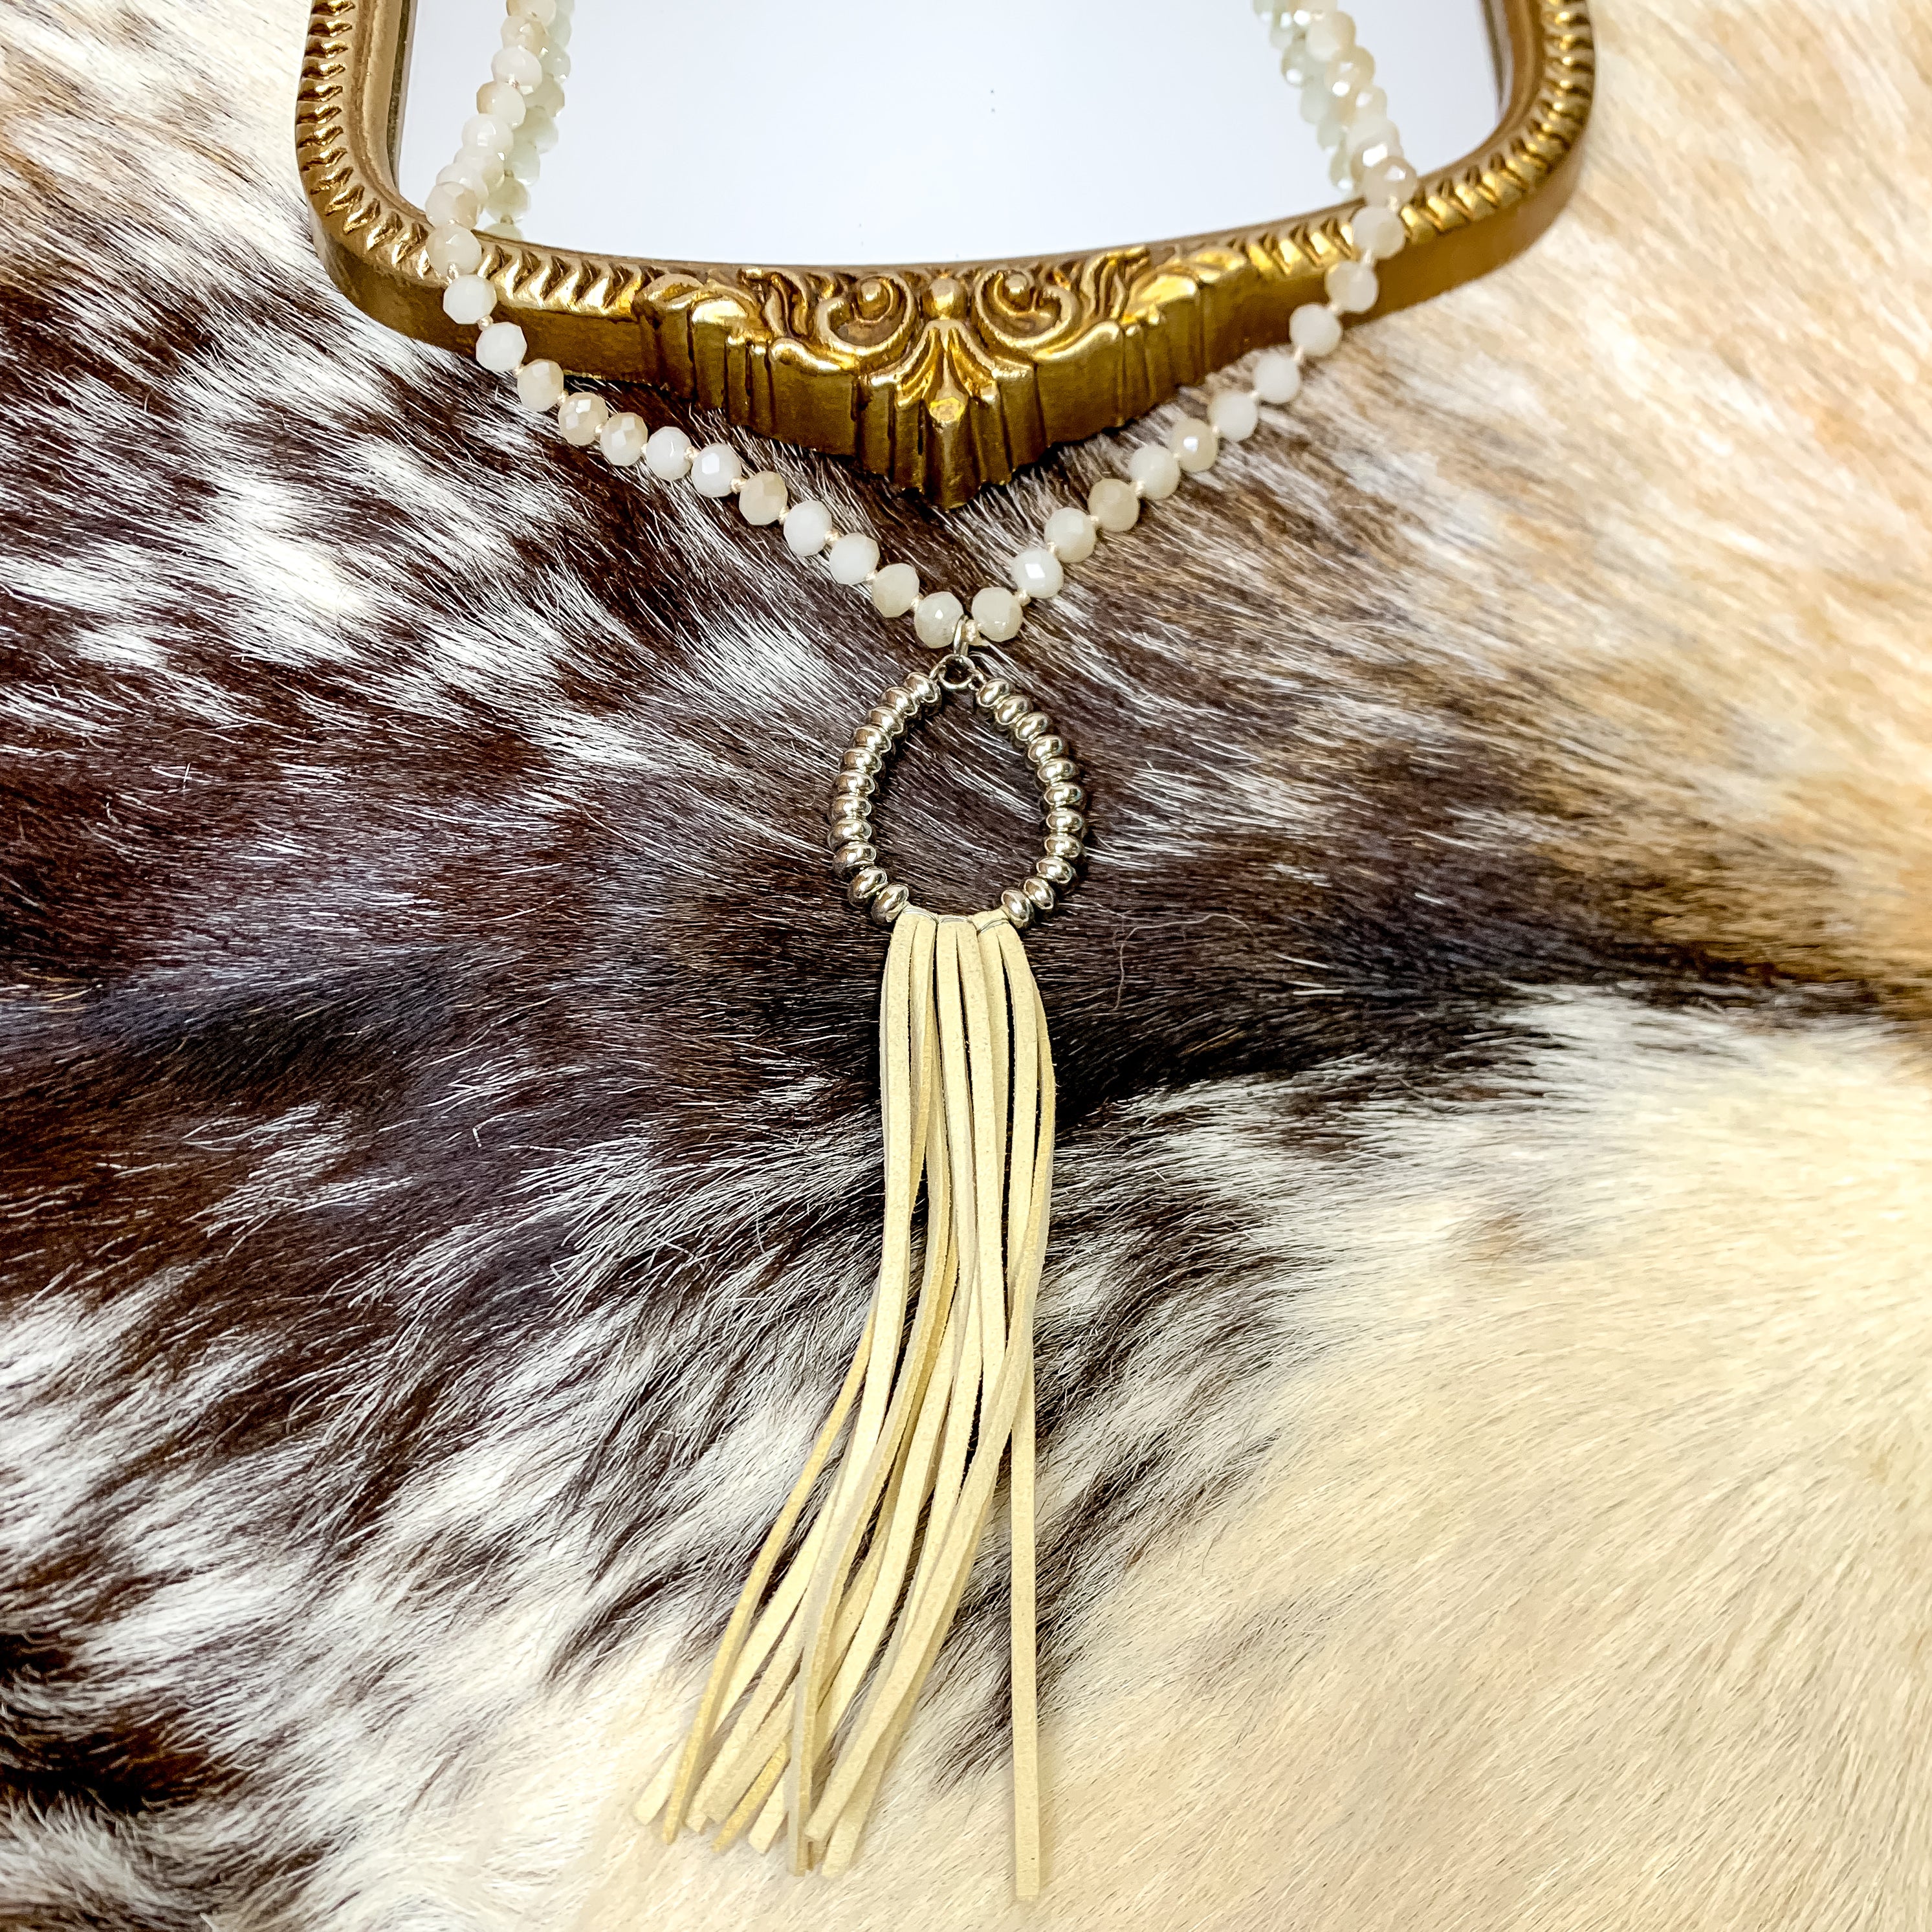 Beaded Teardrop Pendant Necklace With Faux Leather Fringe in Ivory